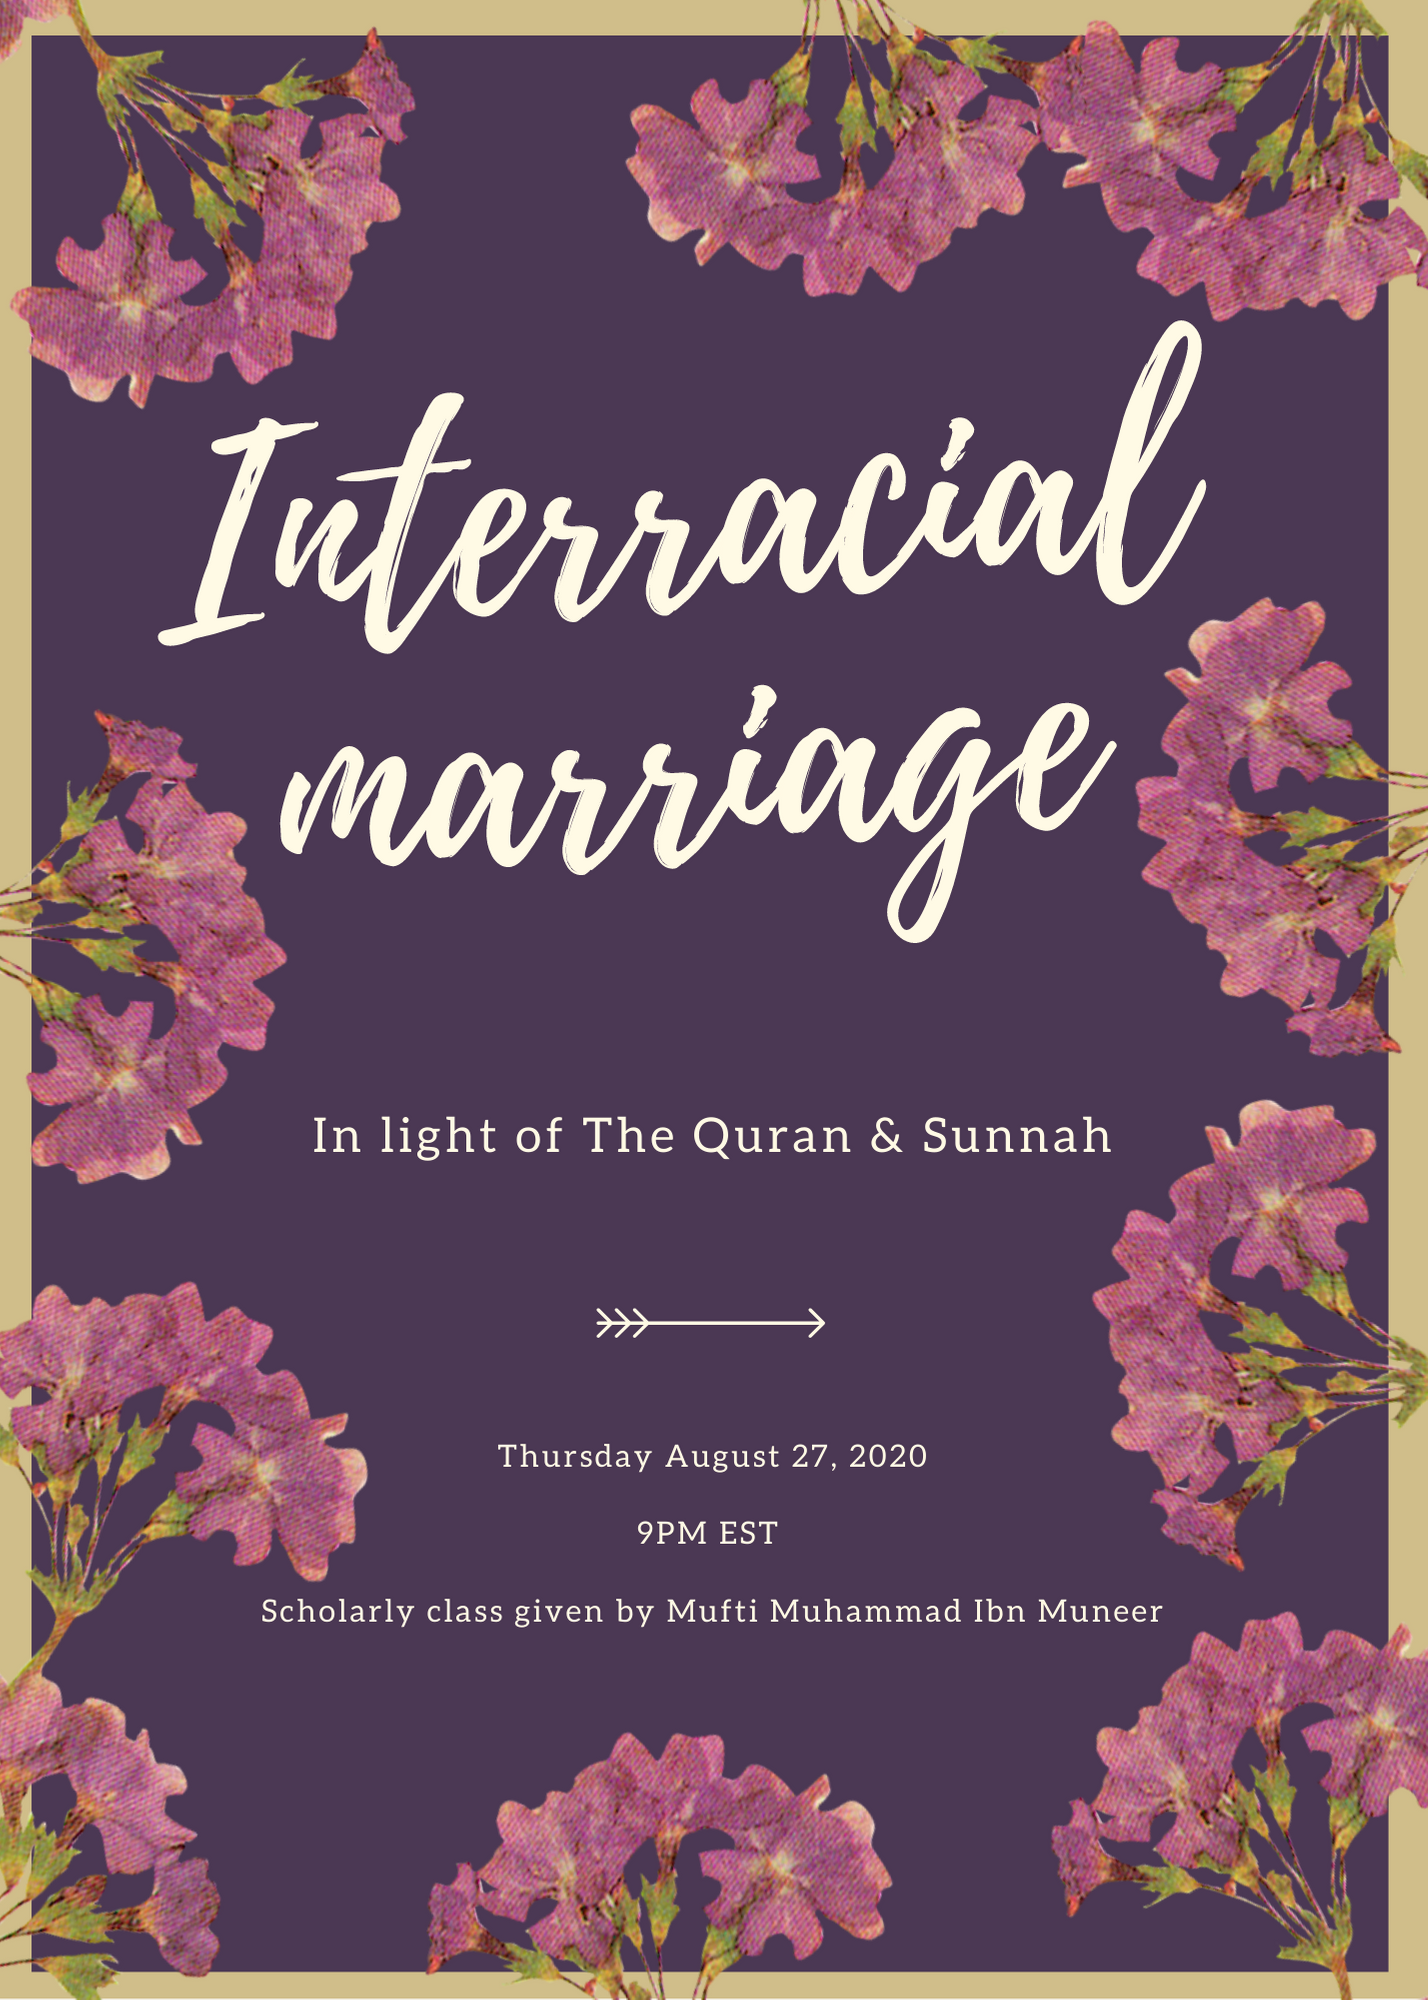 Interracial Marriage In Light of The Quran & Sunnah